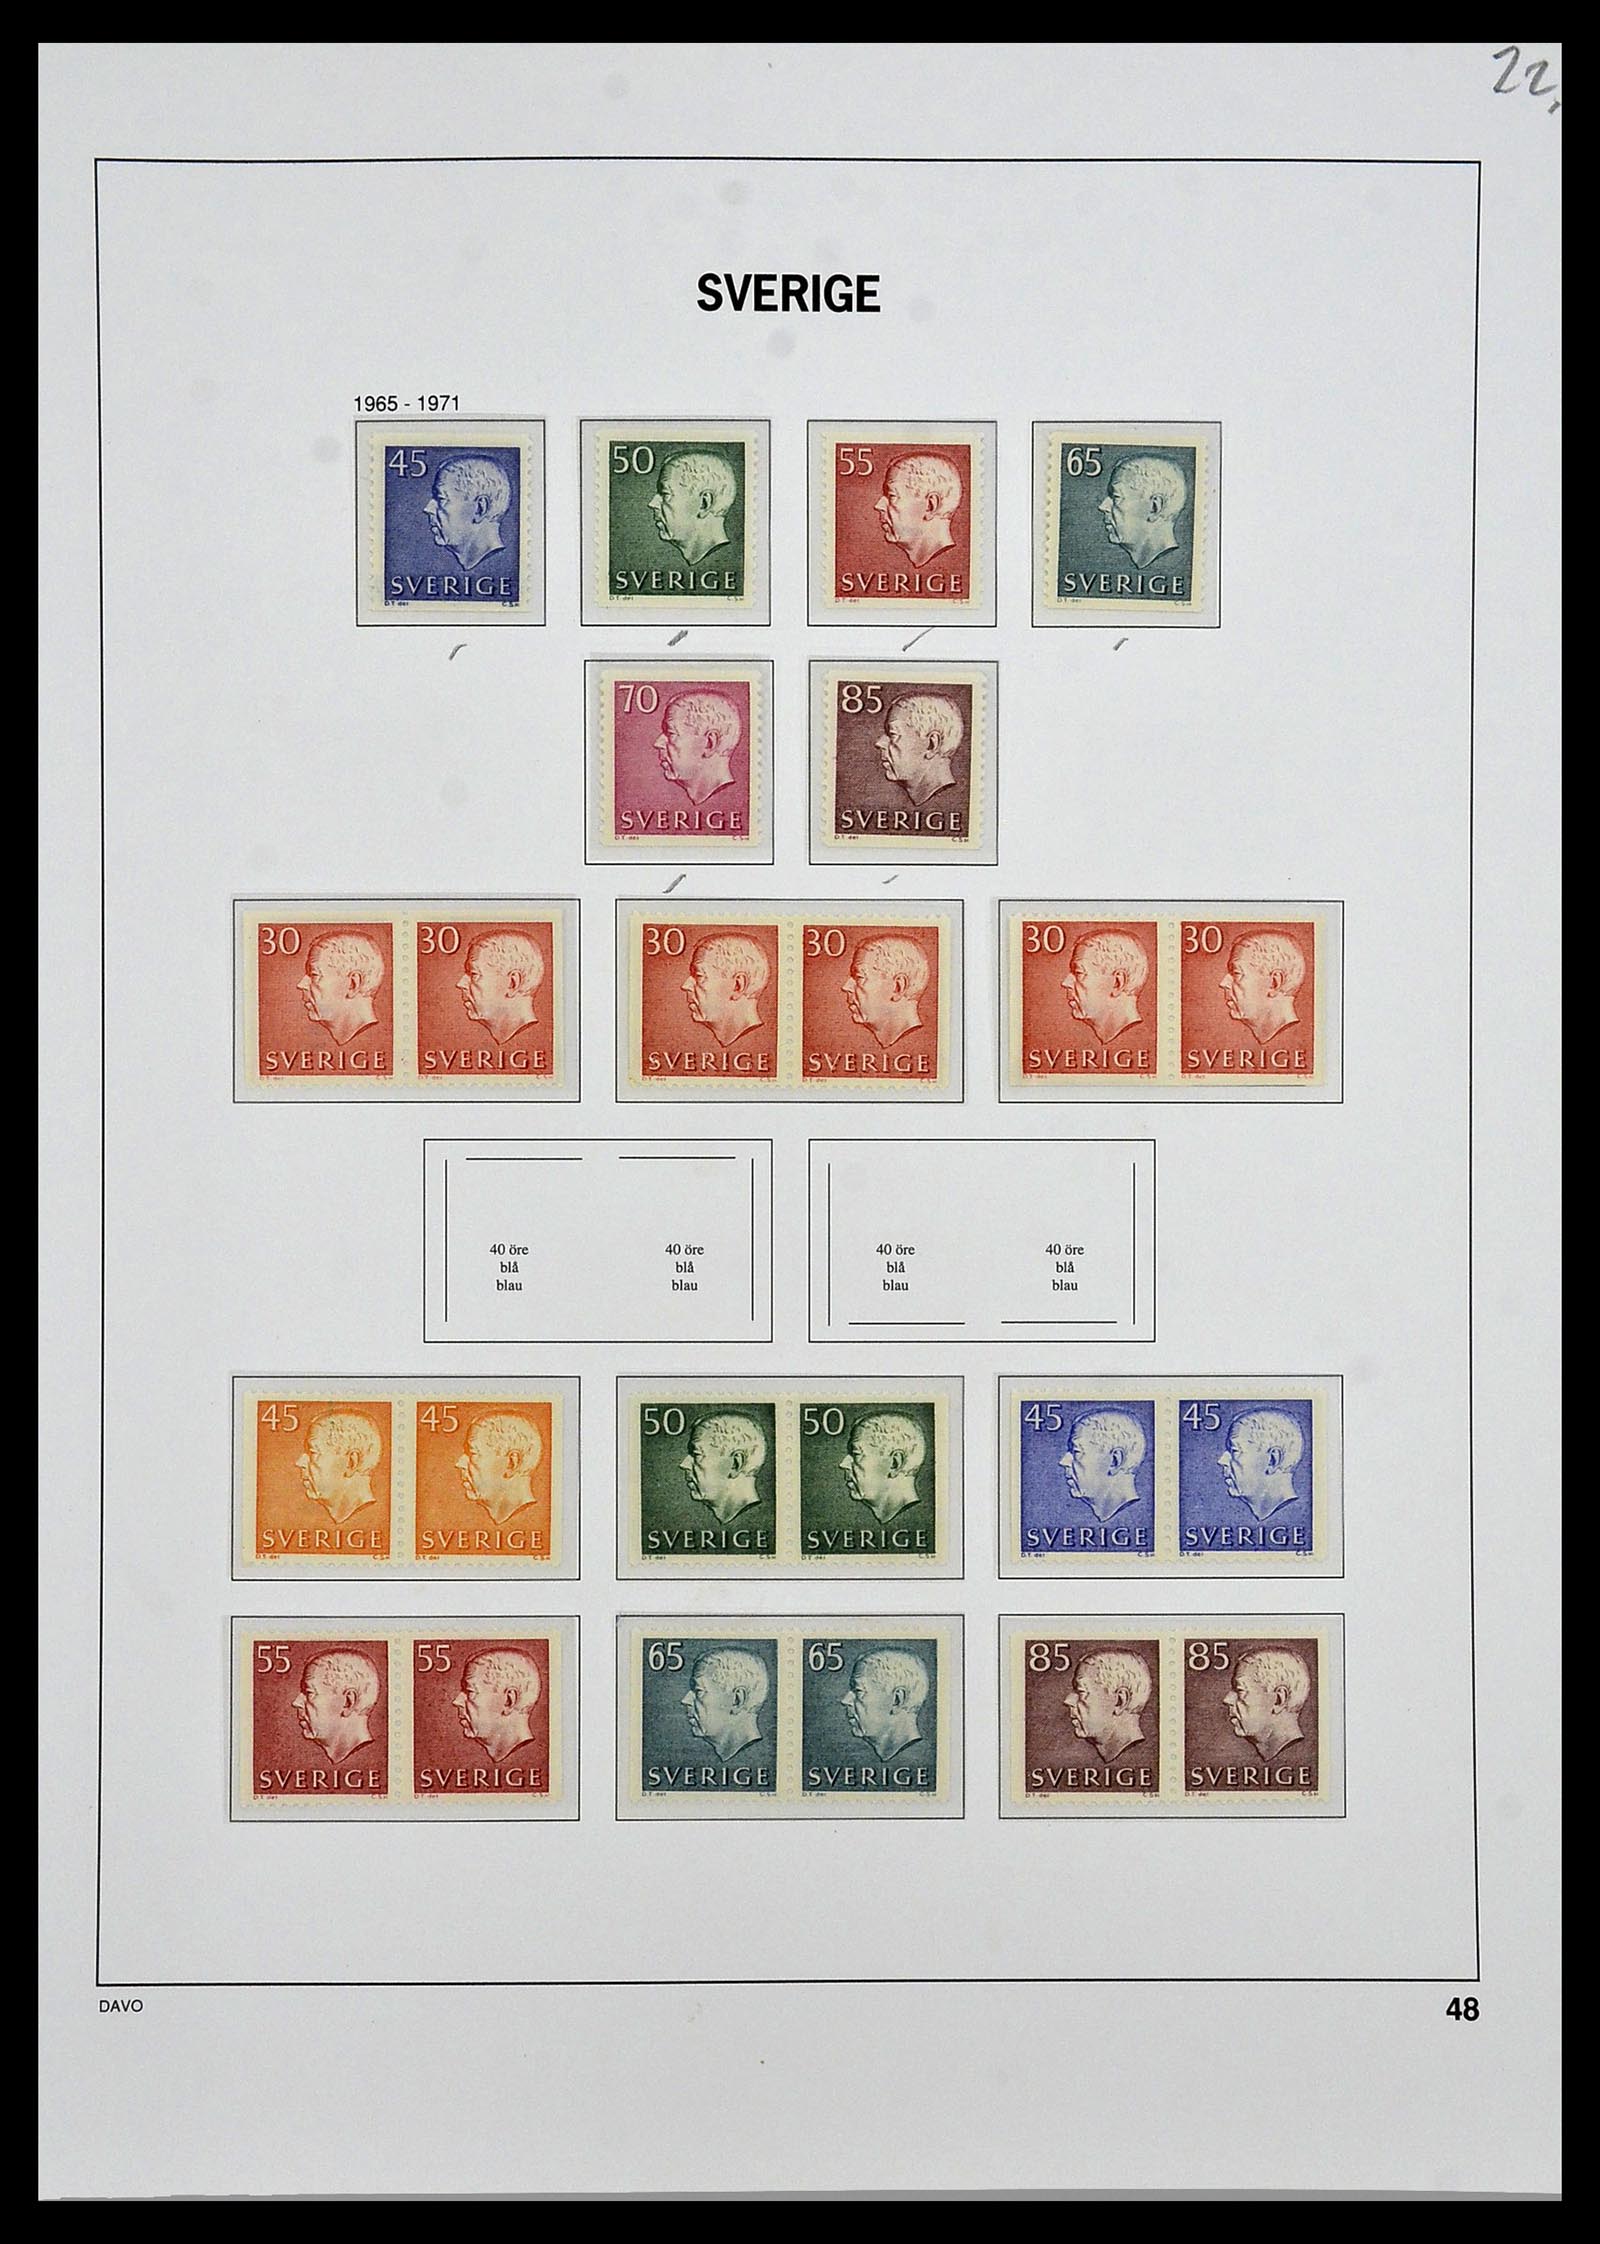 34292 045 - Stamp collection 34292 Sweden 1891-2015!